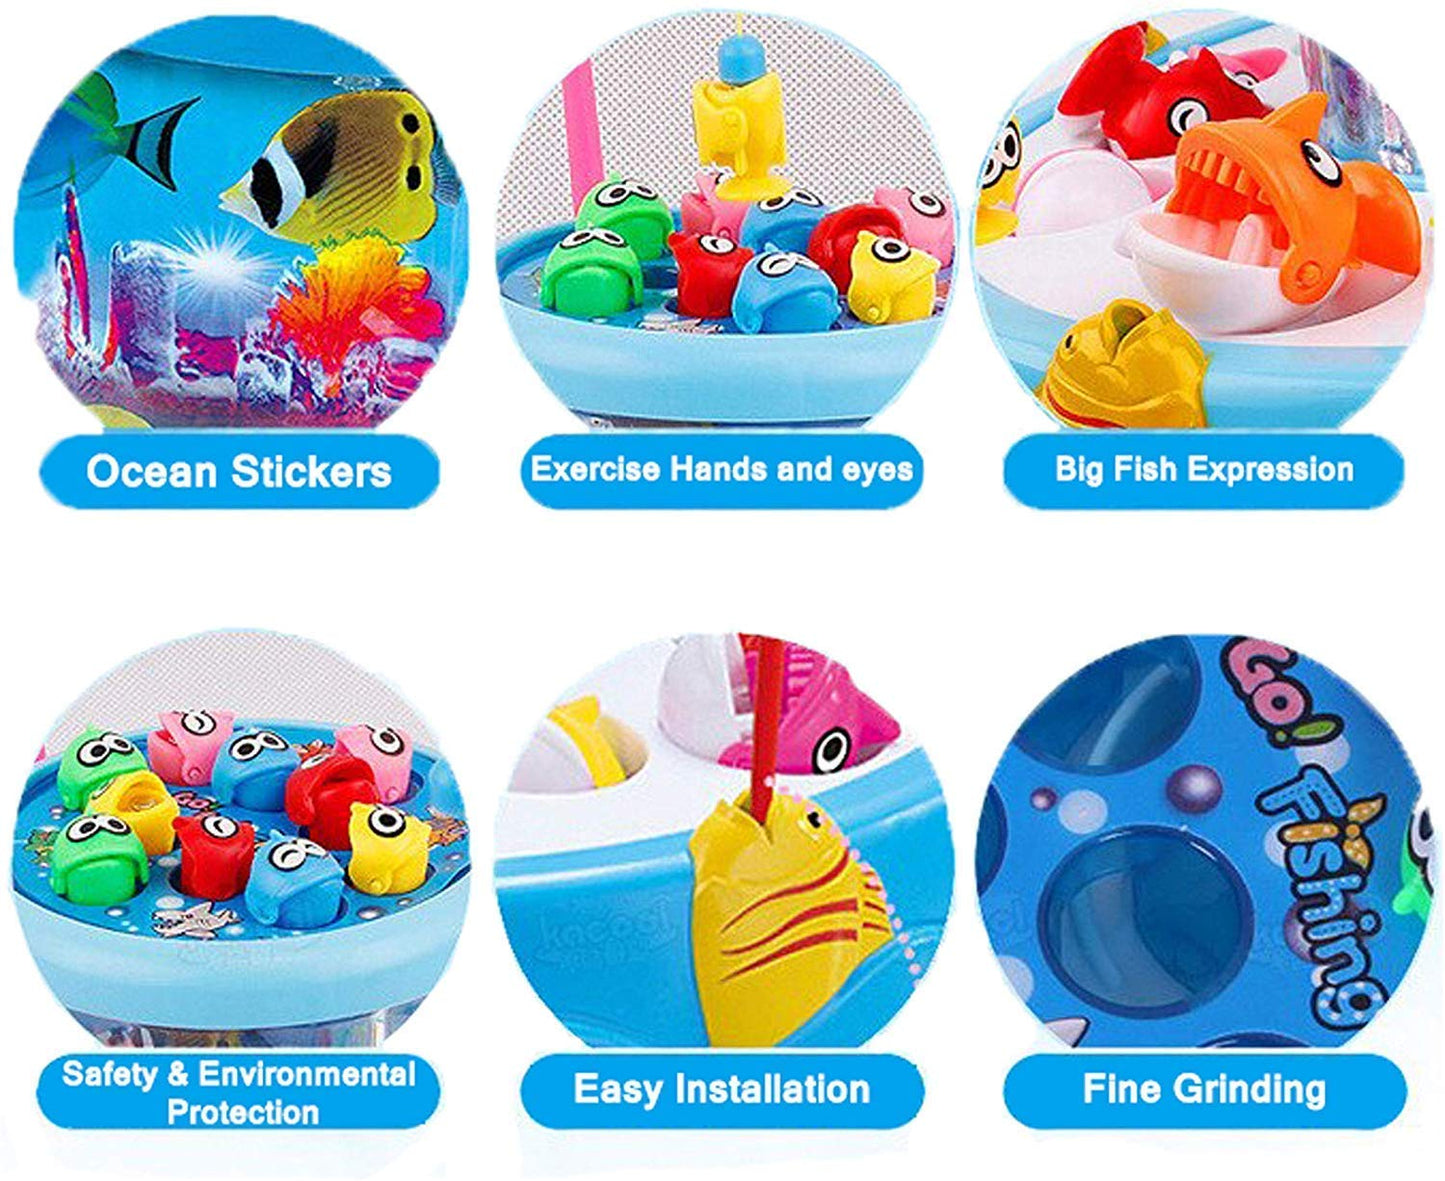 Fishing Game Toys, Fish Toys For Kids Fishing Catching Game With 26 Fishes, 2 Rotary Fish Pond And 4 Pods